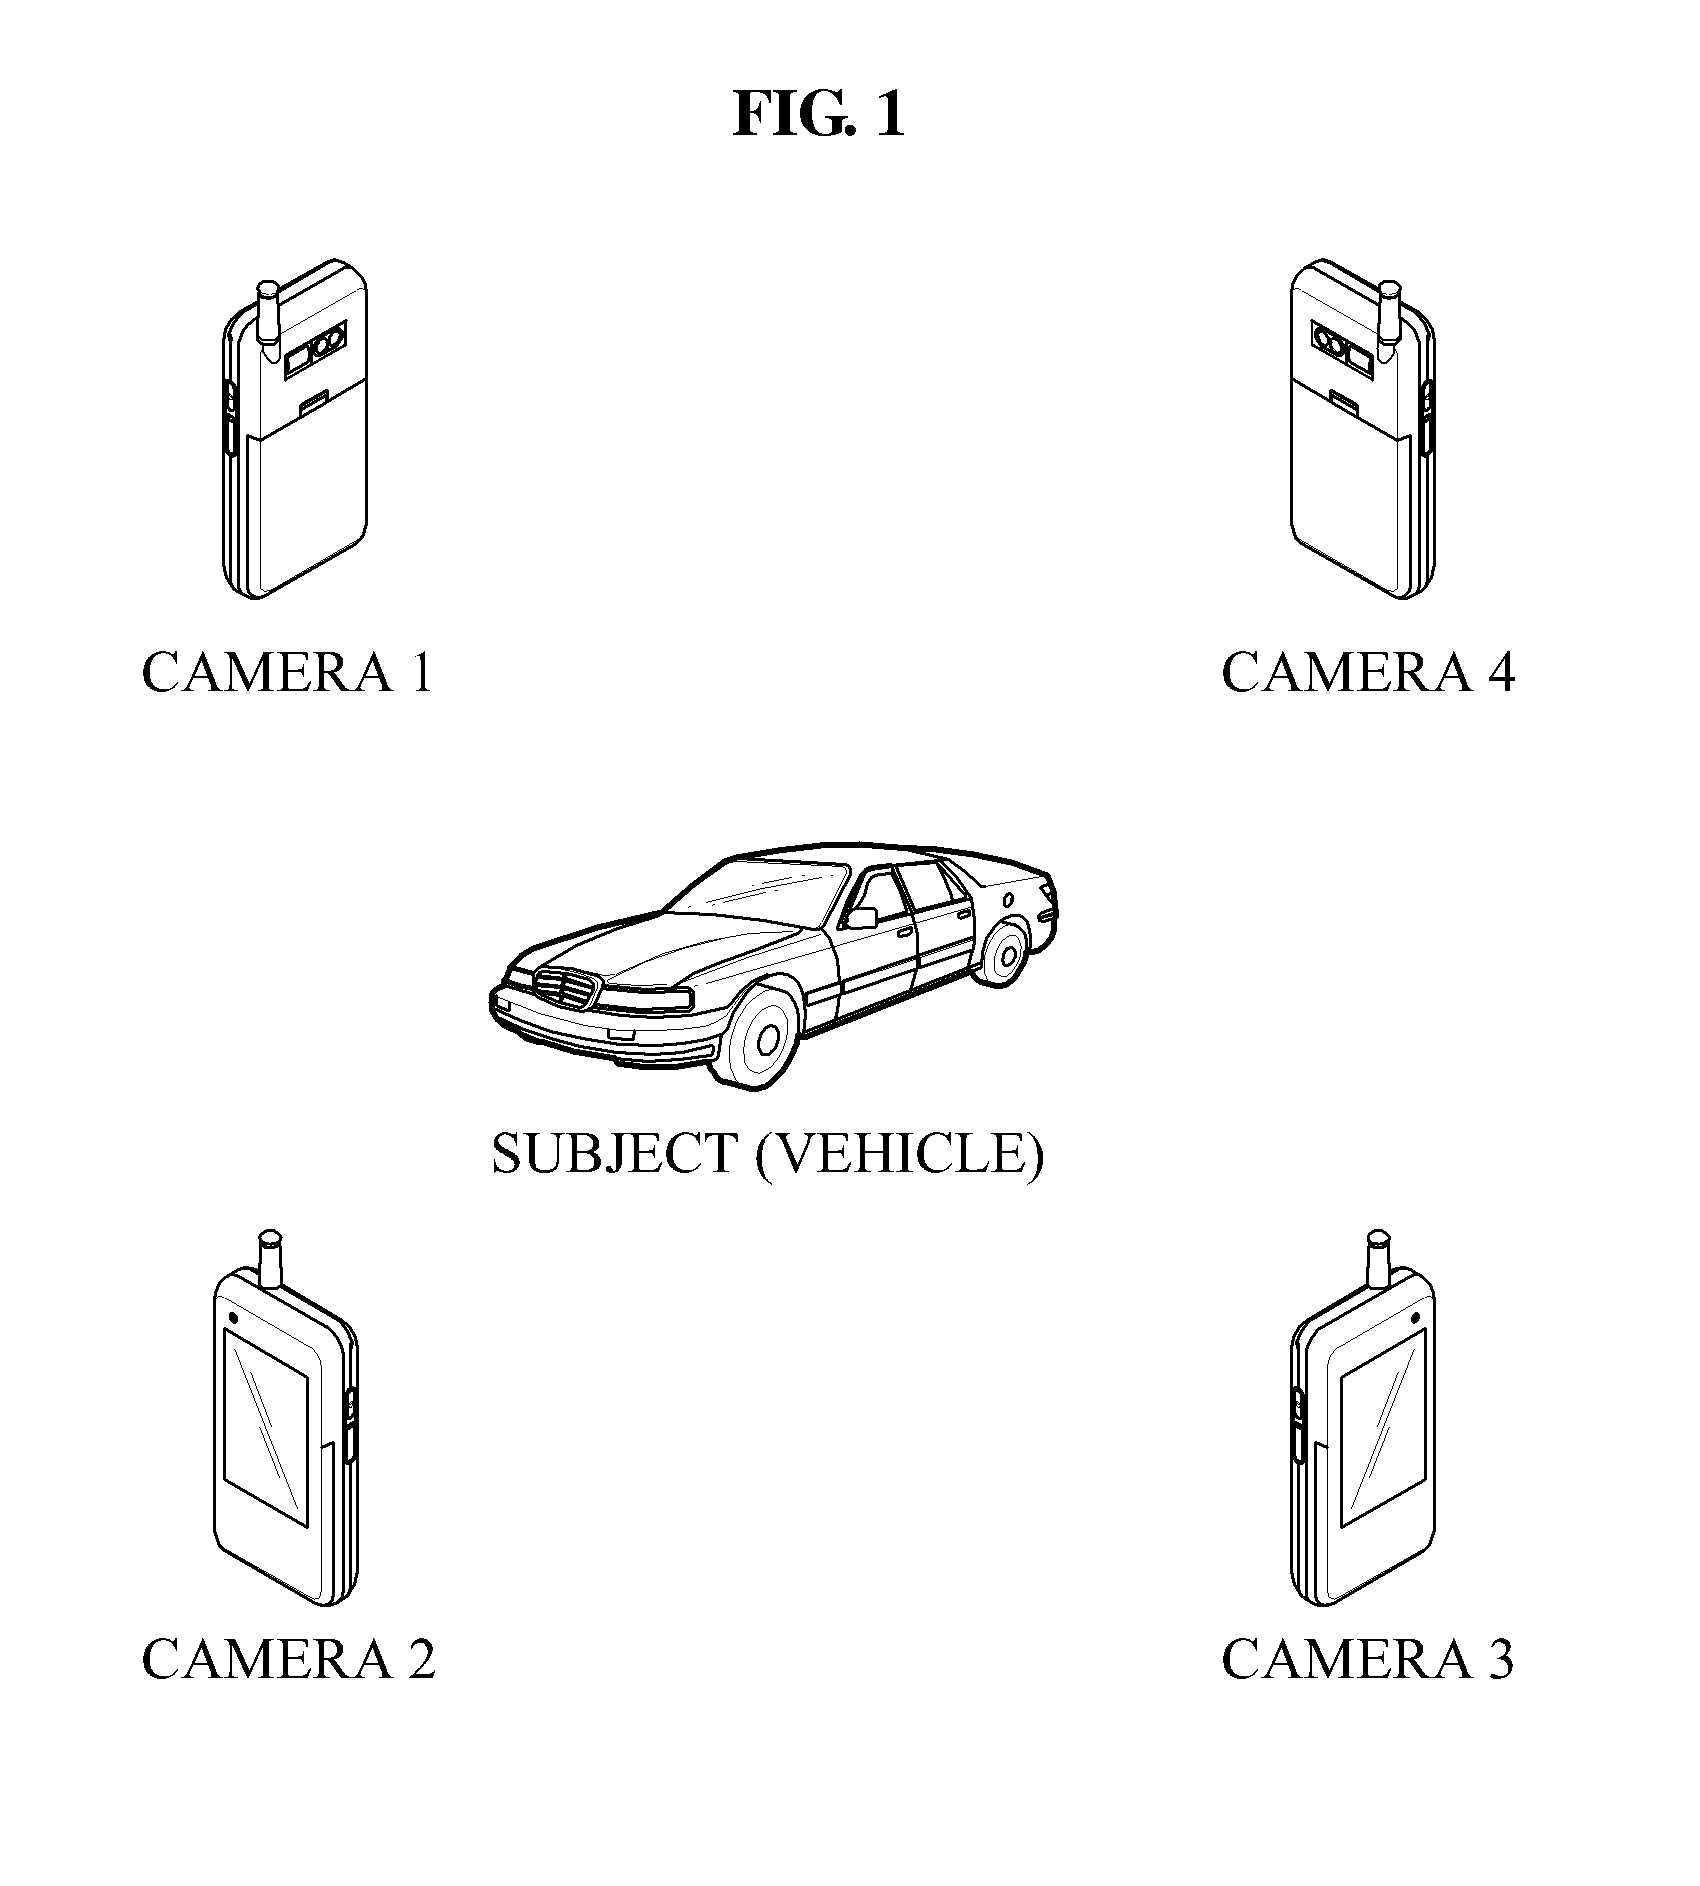 Apparatus and method for generating a three-dimensional image using a collaborative photography group